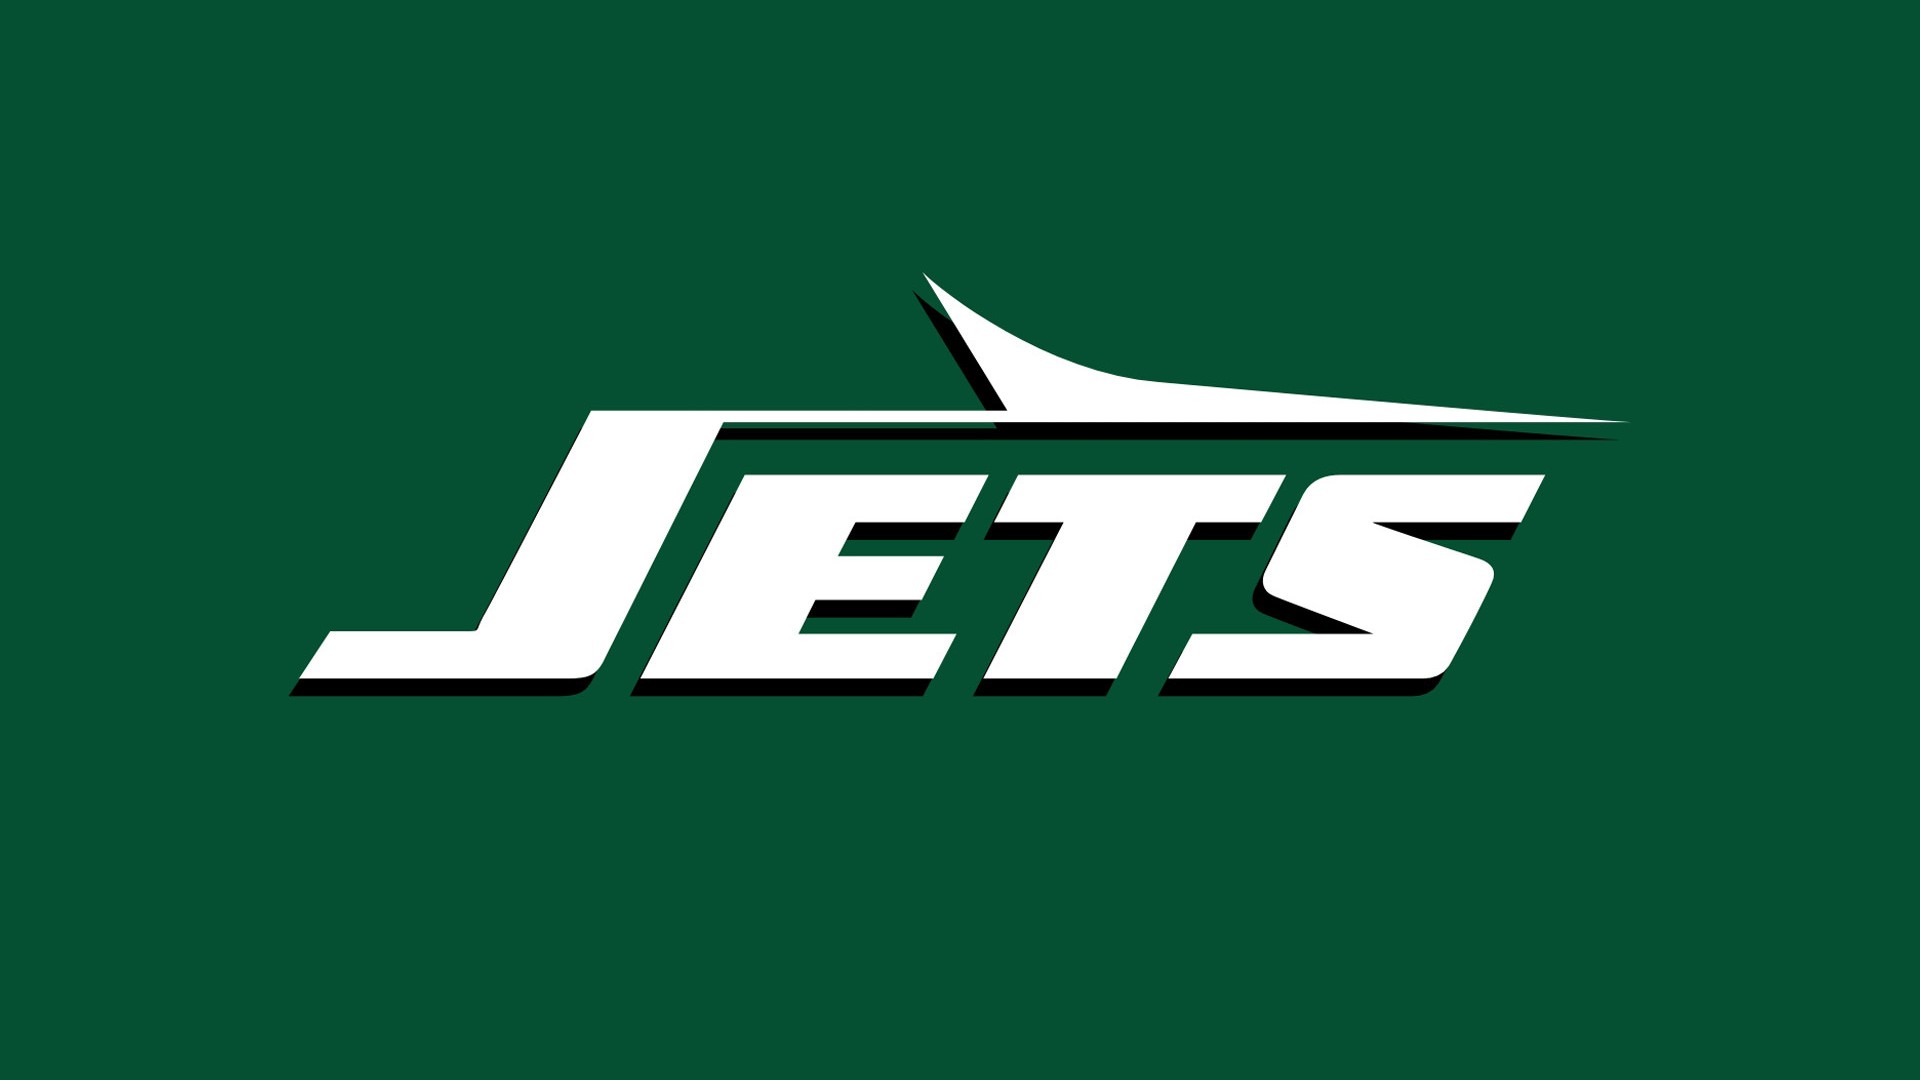 Wallpaper Desktop New York Jets HD with resolution 1920x1080 pixel. You can make this wallpaper for your Mac or Windows Desktop Background, iPhone, Android or Tablet and another Smartphone device